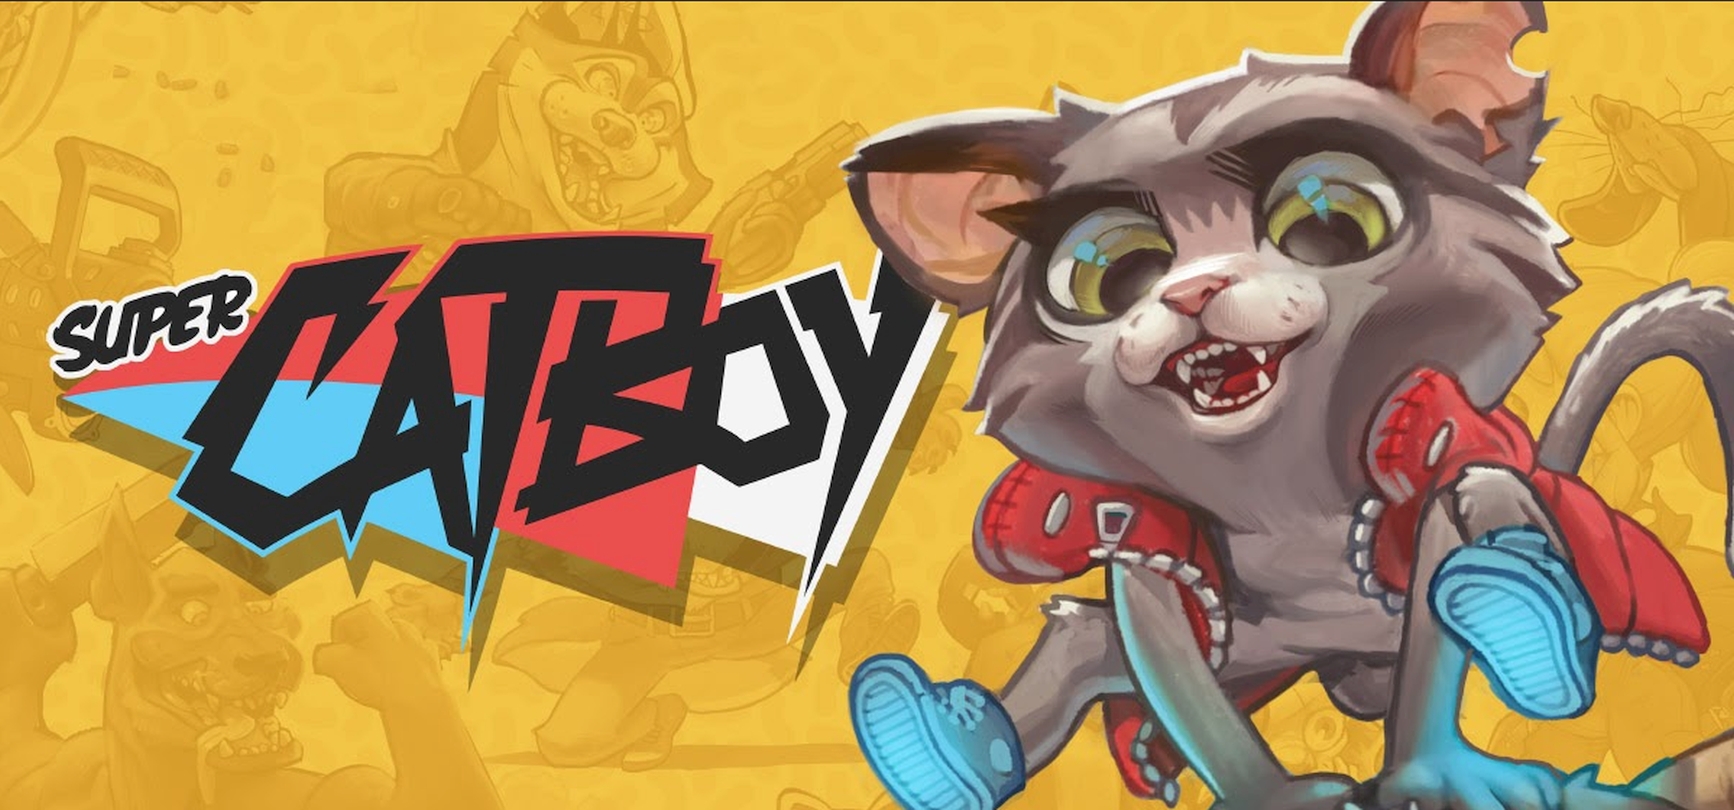 16-Bit Platformer Super Catboy Launches In Fall 2021 For PC With A Pre-Alpha Demo Available Now